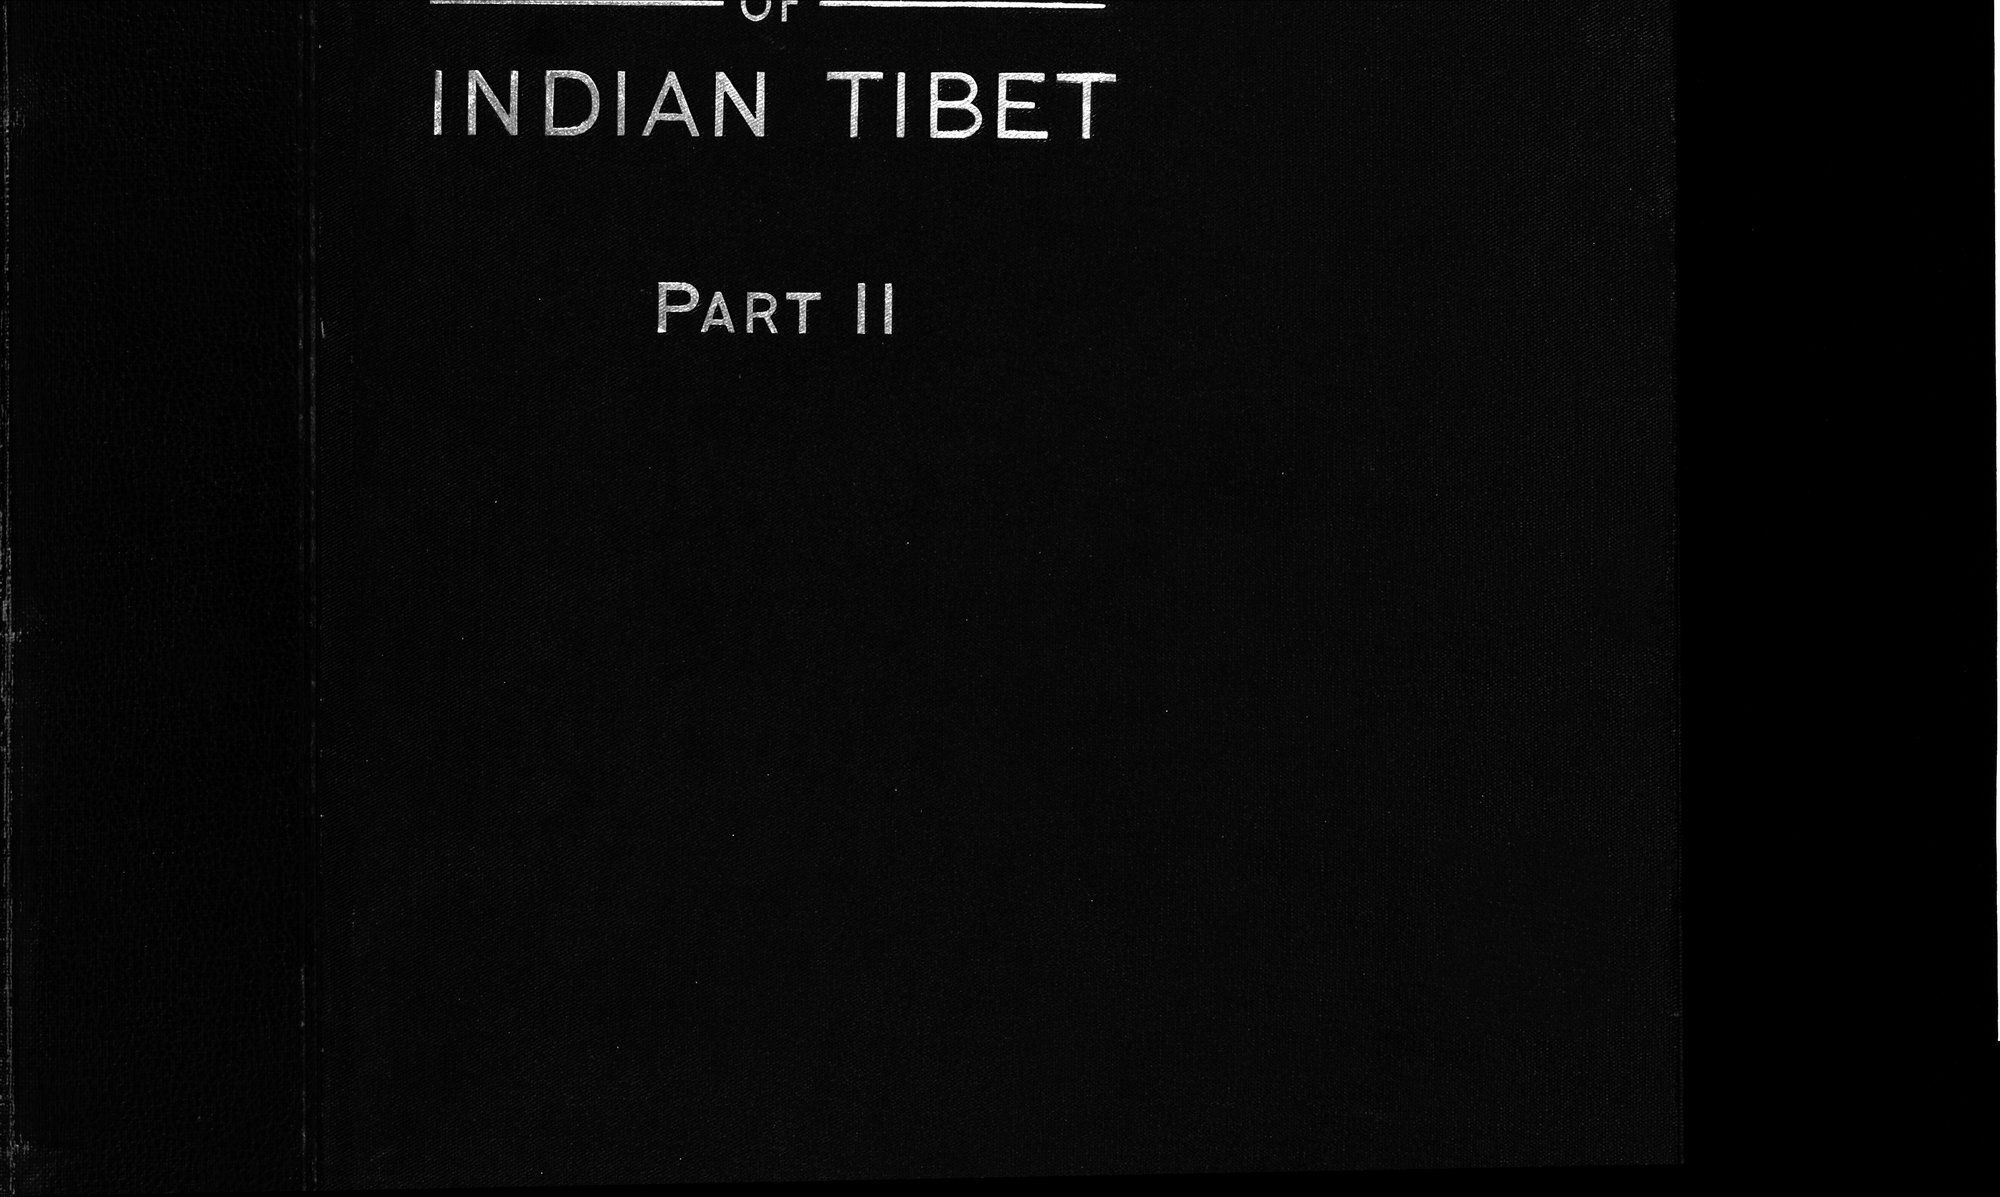 Antiquities of Indian Tibet : vol.2 / Page 1 (Grayscale High Resolution Image)